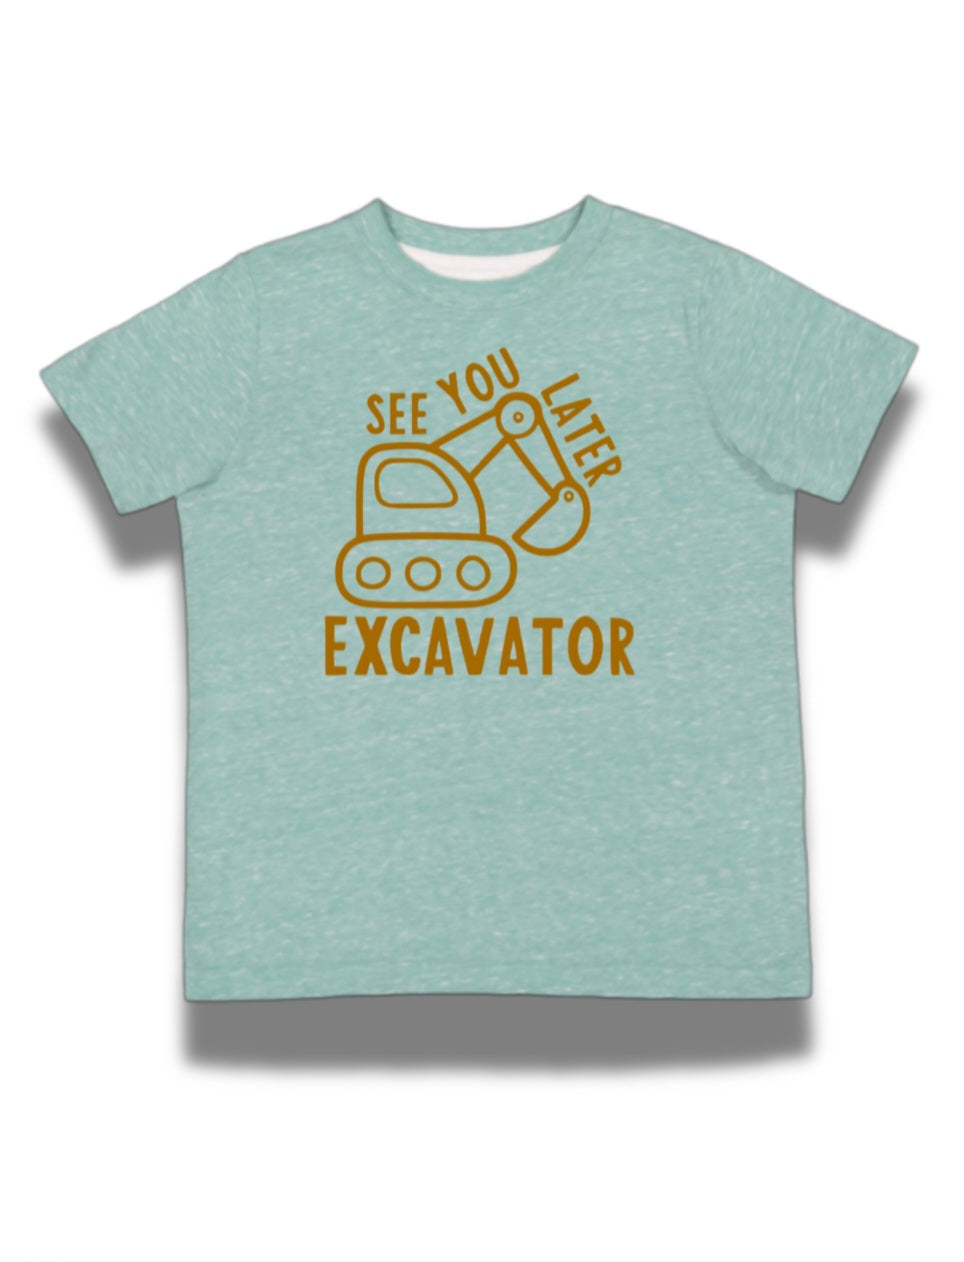 See You Later, Excavator Tee